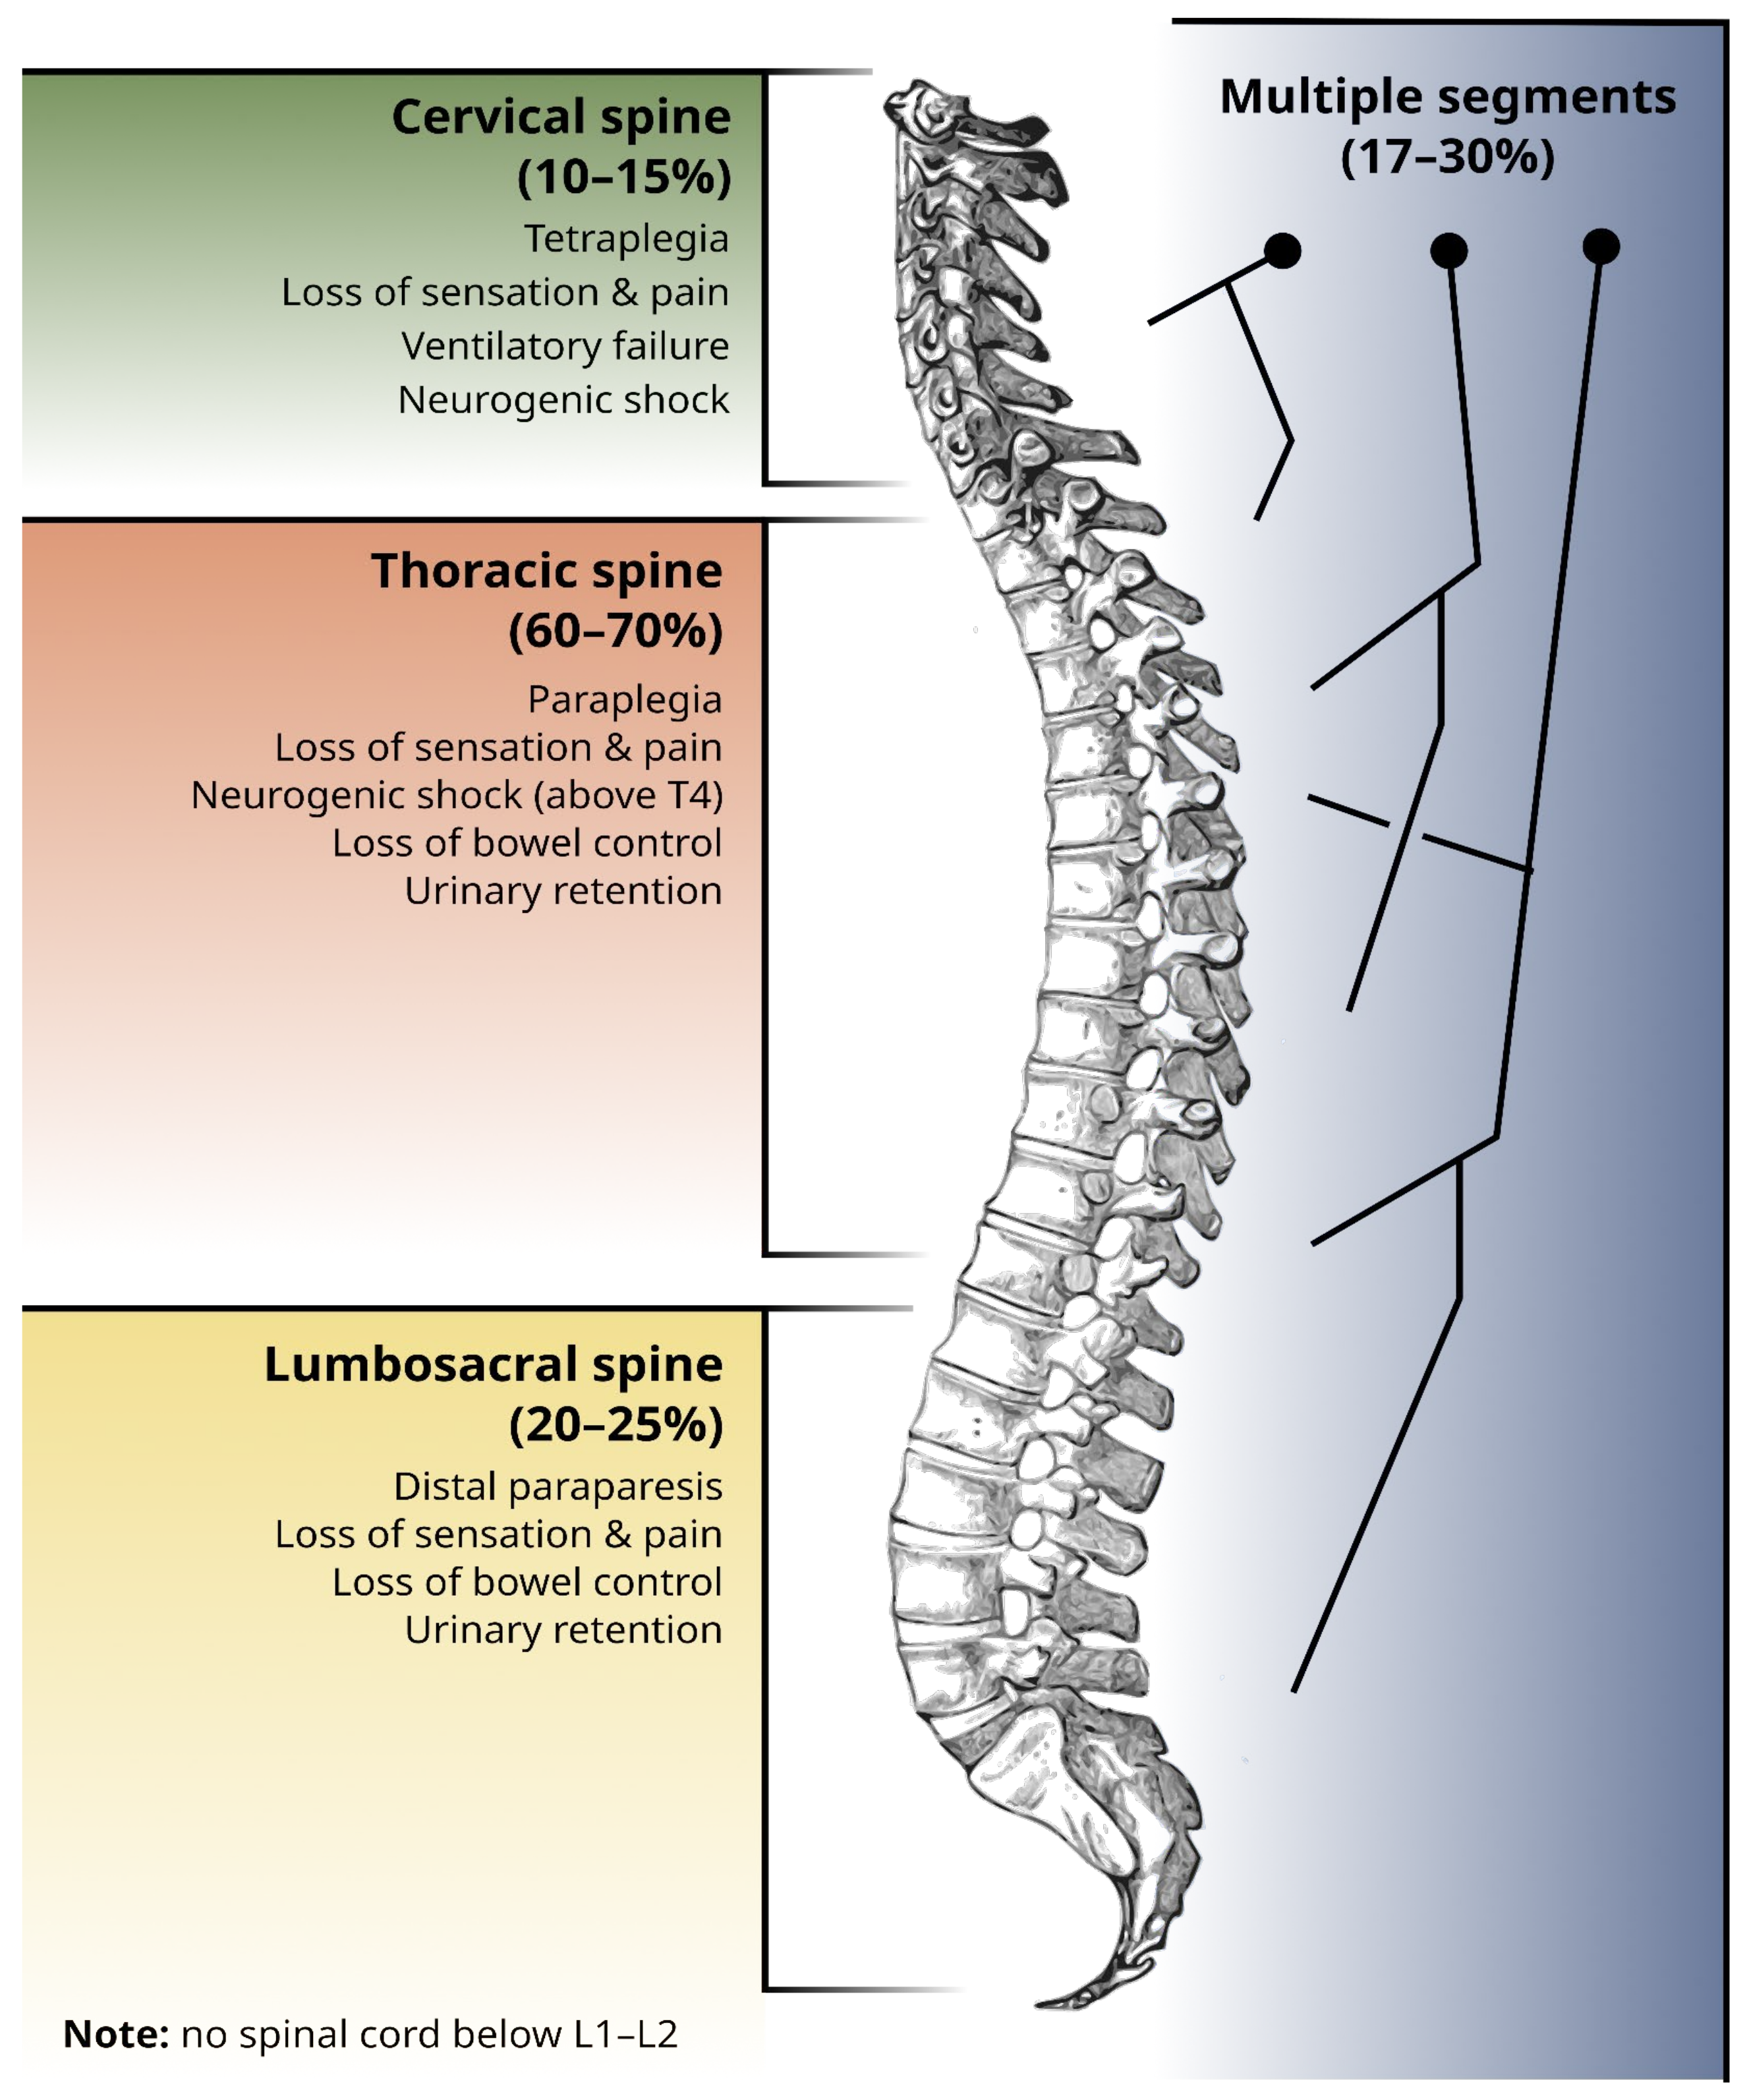 Cancers | Free Full-Text | Multidisciplinary Approach to Spinal Metastases  and Metastatic Spinal Cord Compression&mdash;A New Integrative Flowchart  for Patient Management